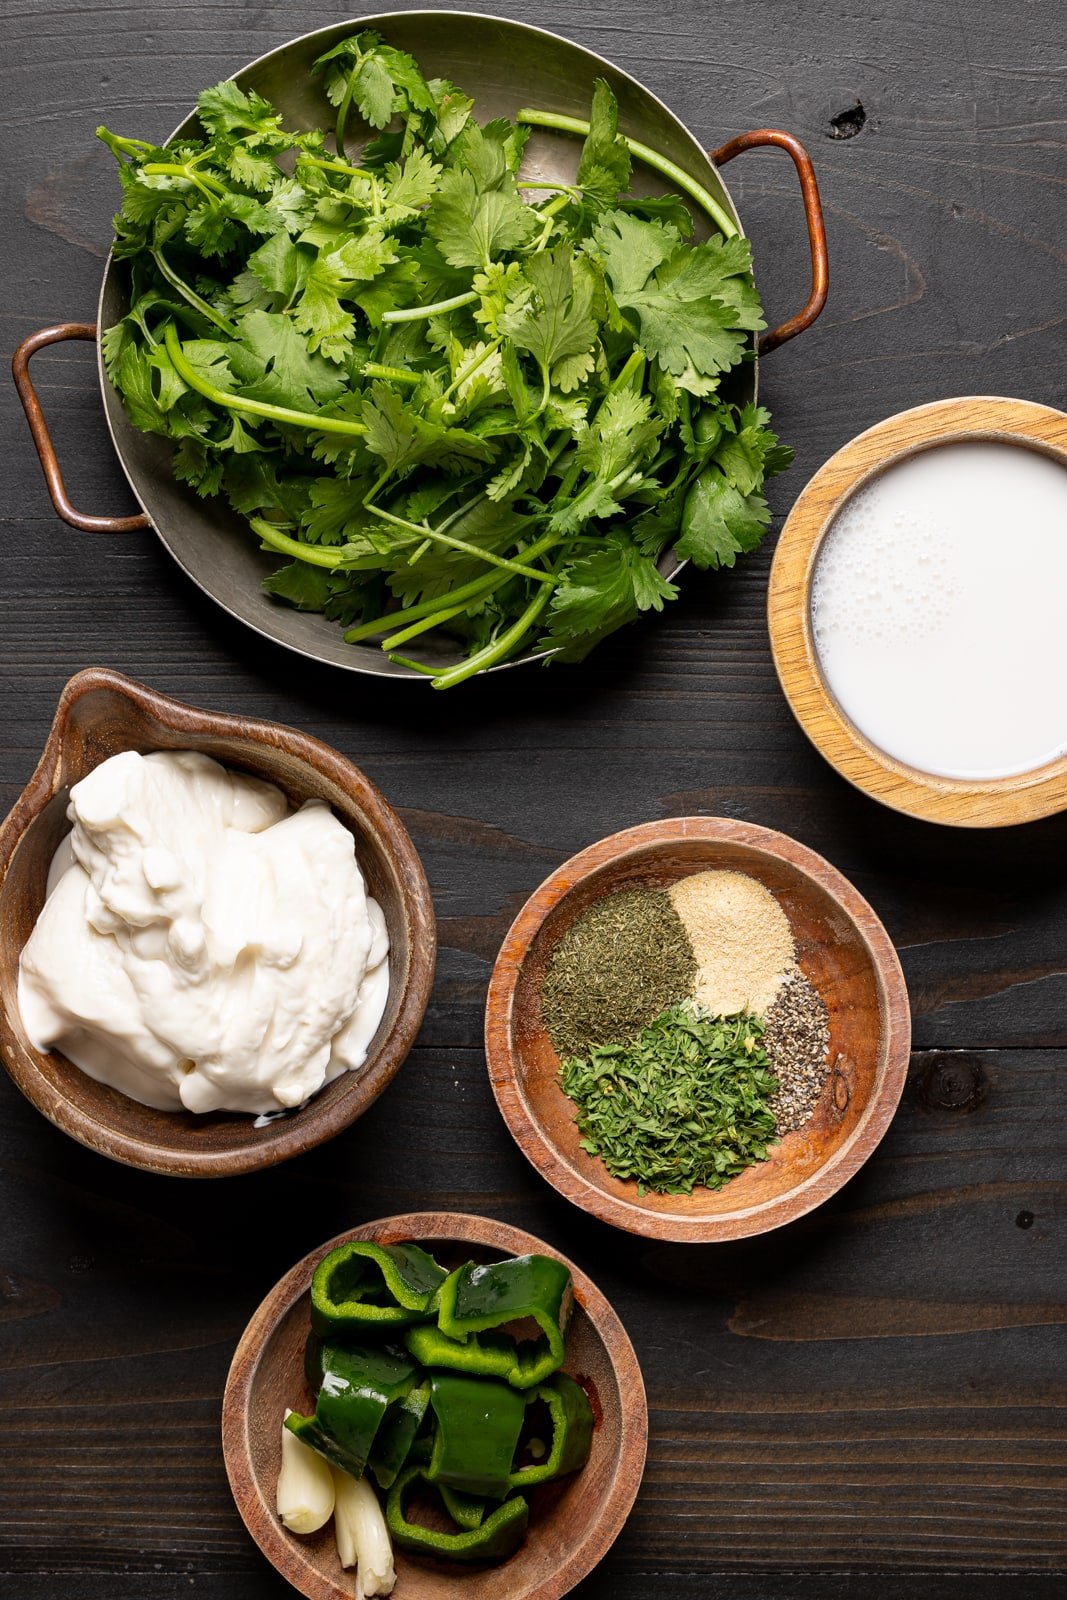 Green goddess dressing ingredients including cilantro, mayo, herbs + seasonings, peppers, and milk. 